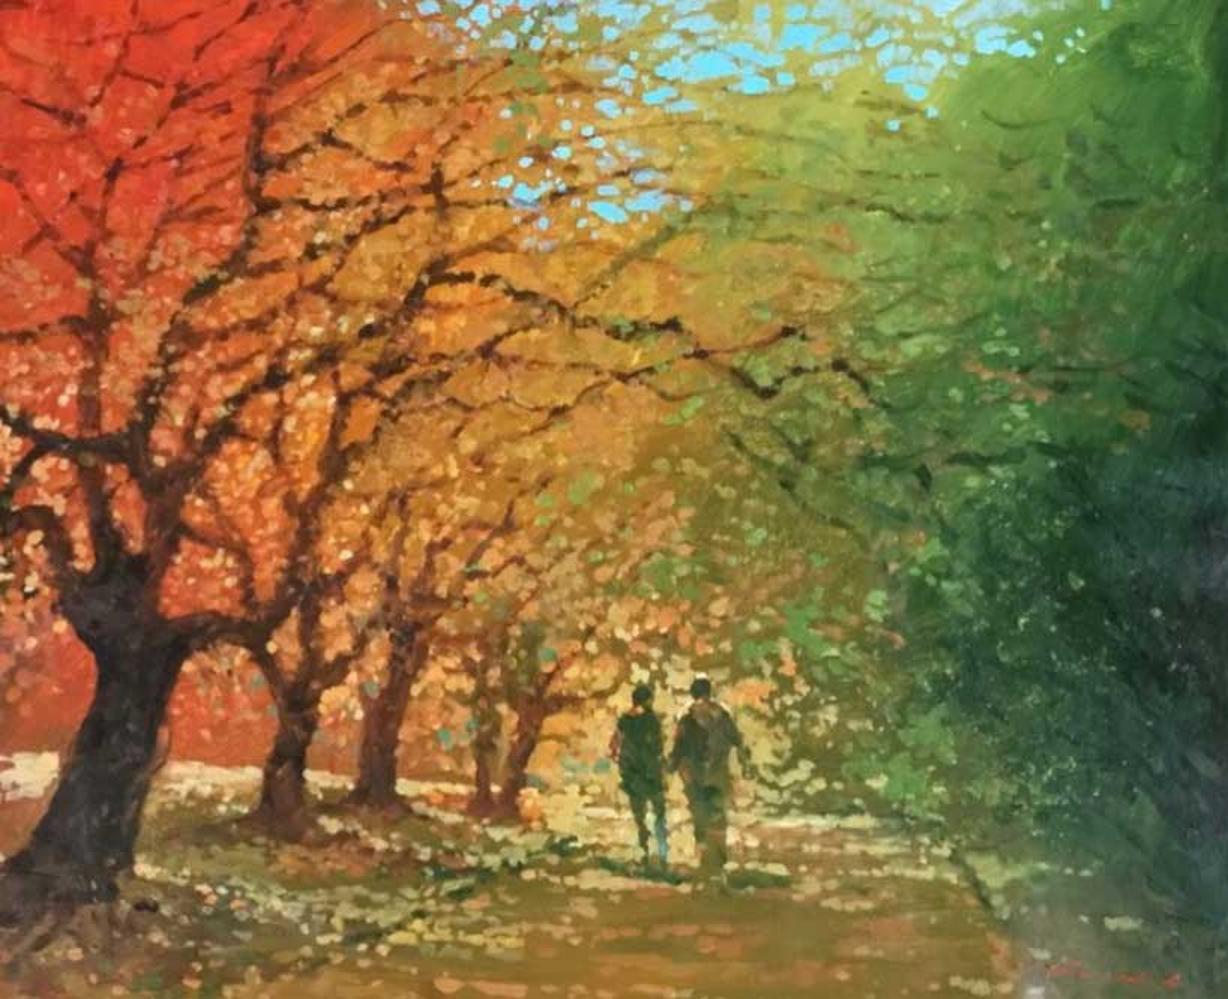 David Hinchcliffe Landscape Painting - Golden Afternoon - Autumn Walks / Fall in Central Park: Oil Paint on Canvas